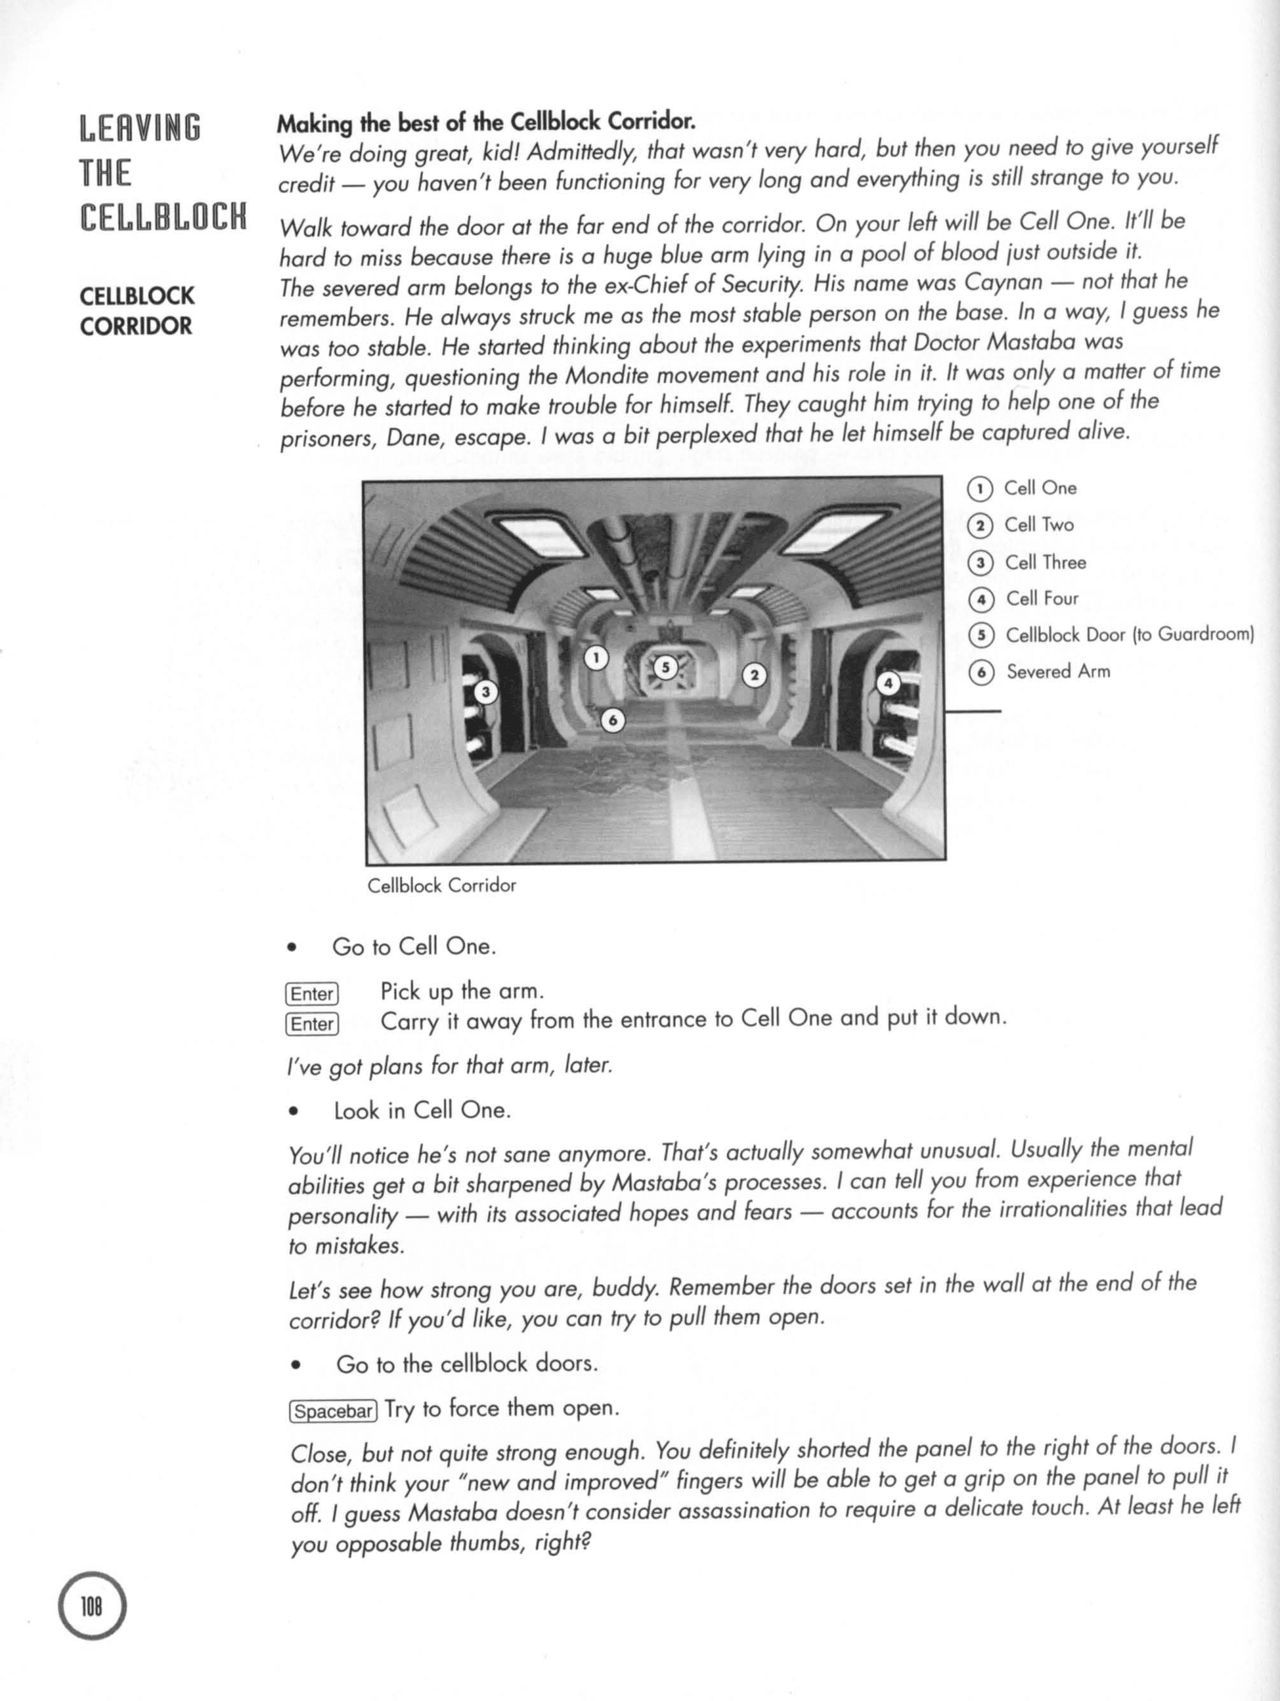 BioForge (PC (DOS/Windows)) Strategy Guide 109